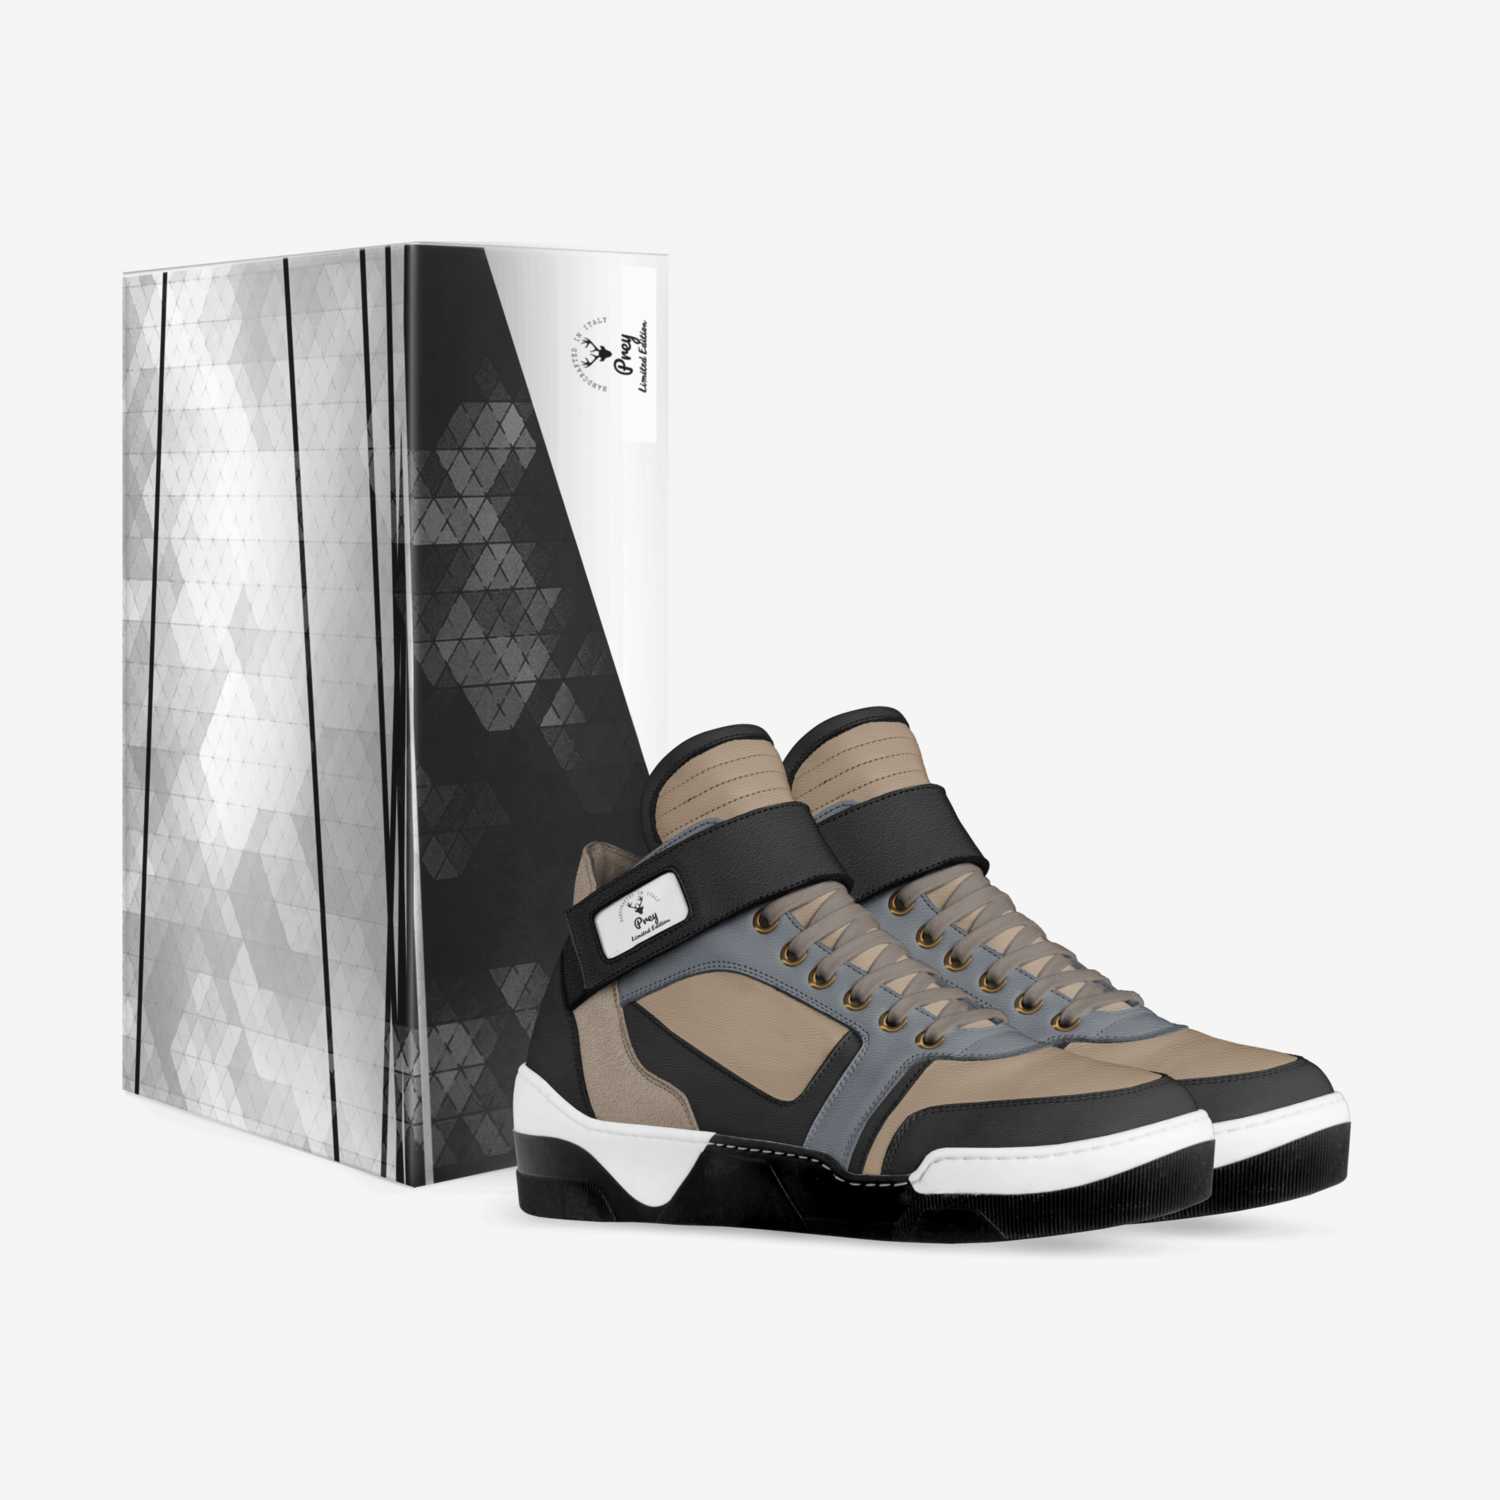 Prey custom made in Italy shoes by Alphonso Jones Iii | Box view